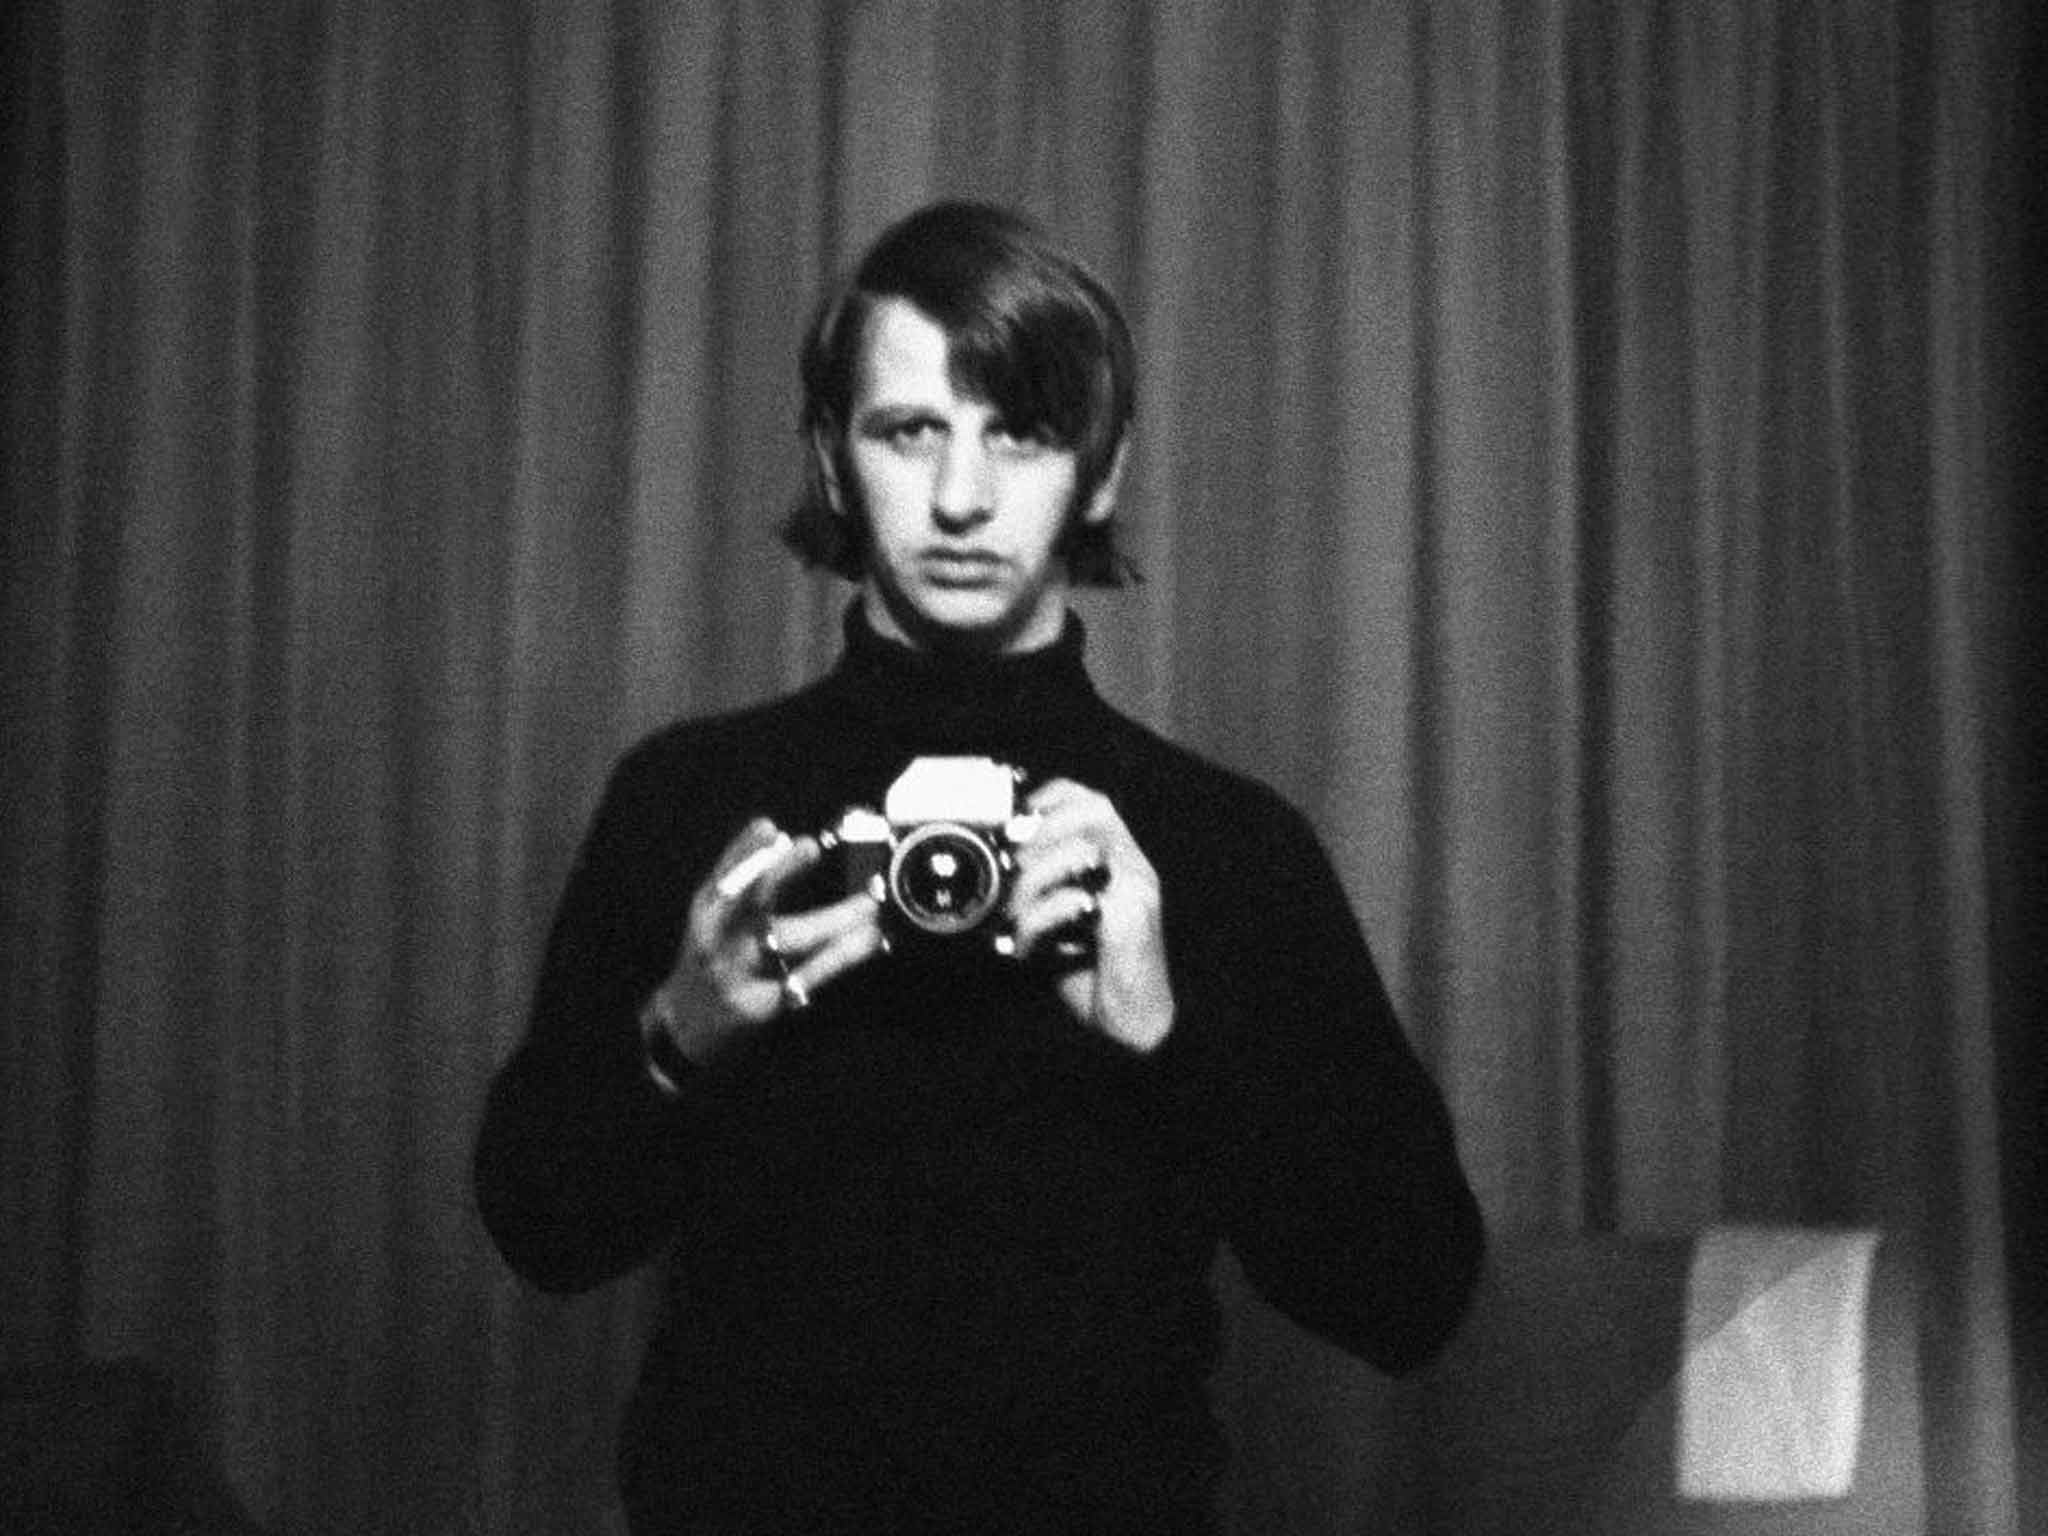 Ringo Starr's photo of The Beatles: The band's best photographer